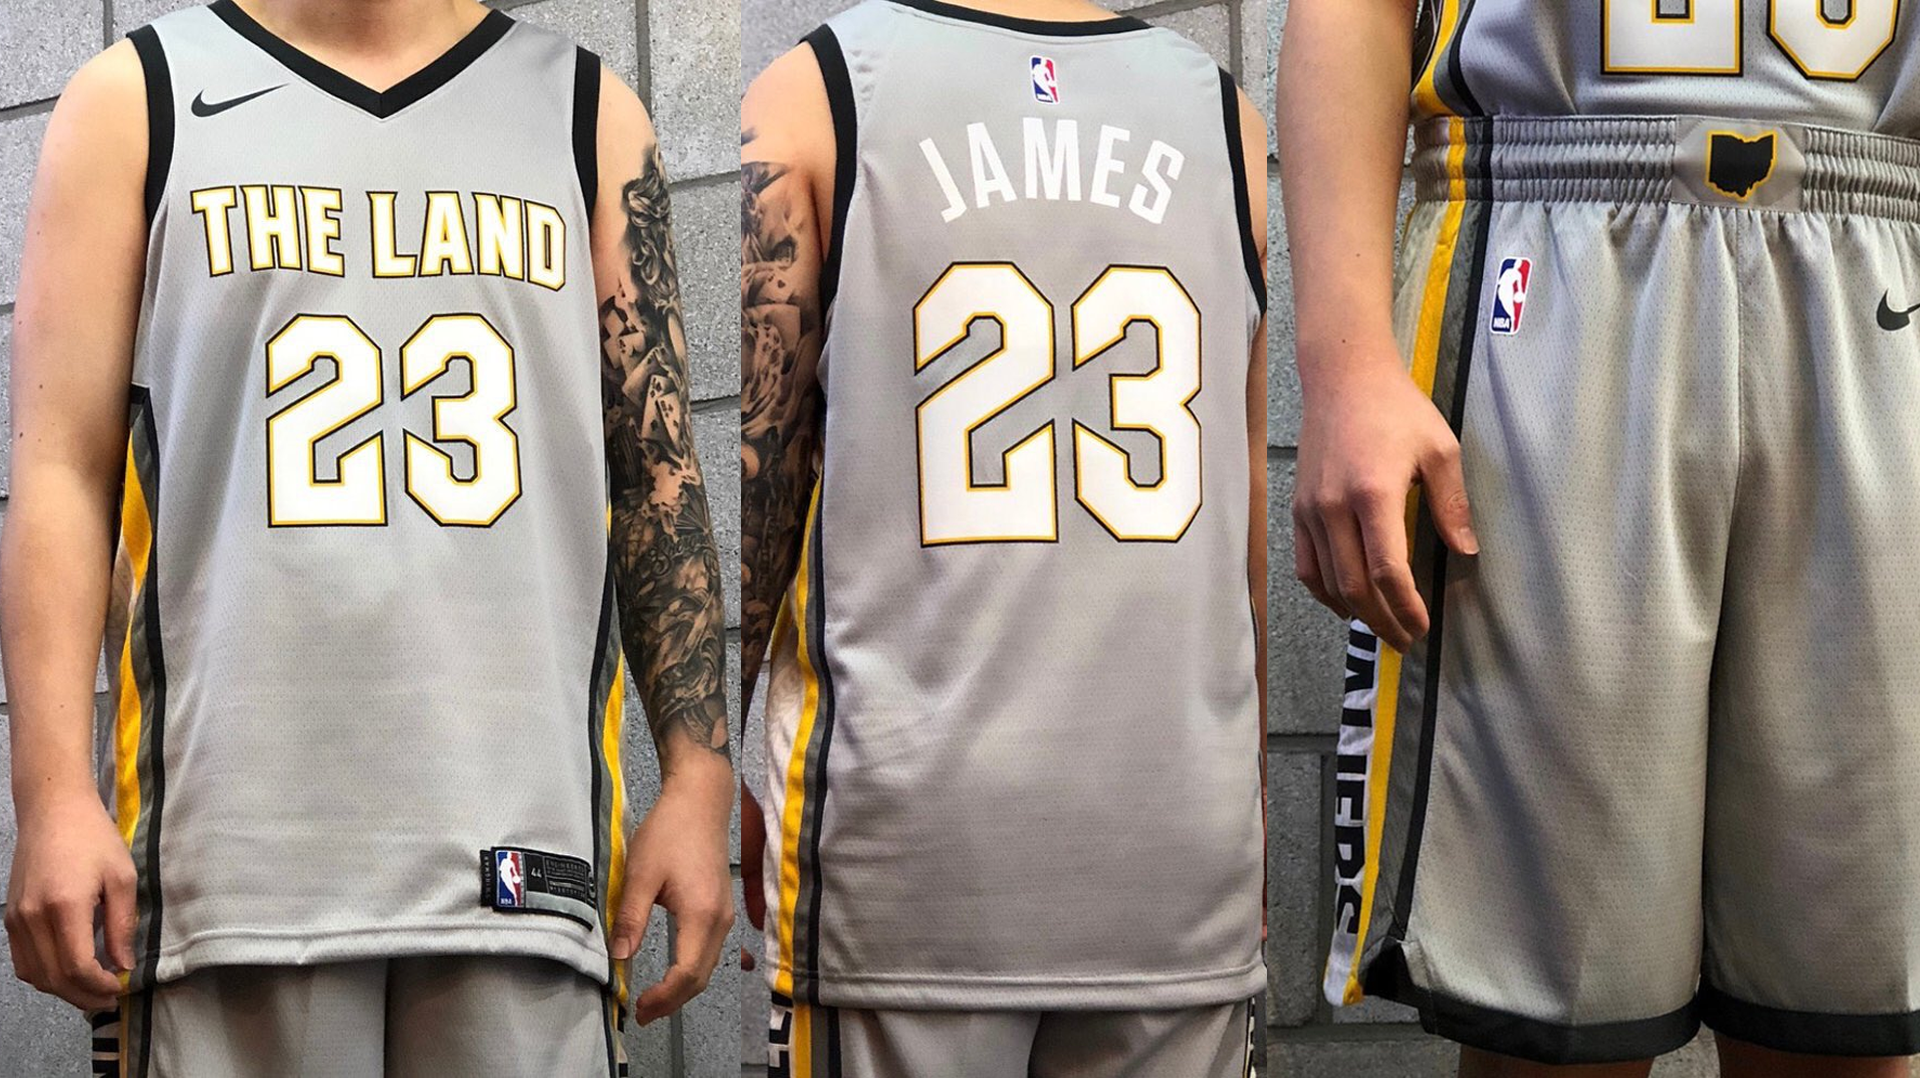 Social media reacts to the first look at Cleveland Cavaliers' gray